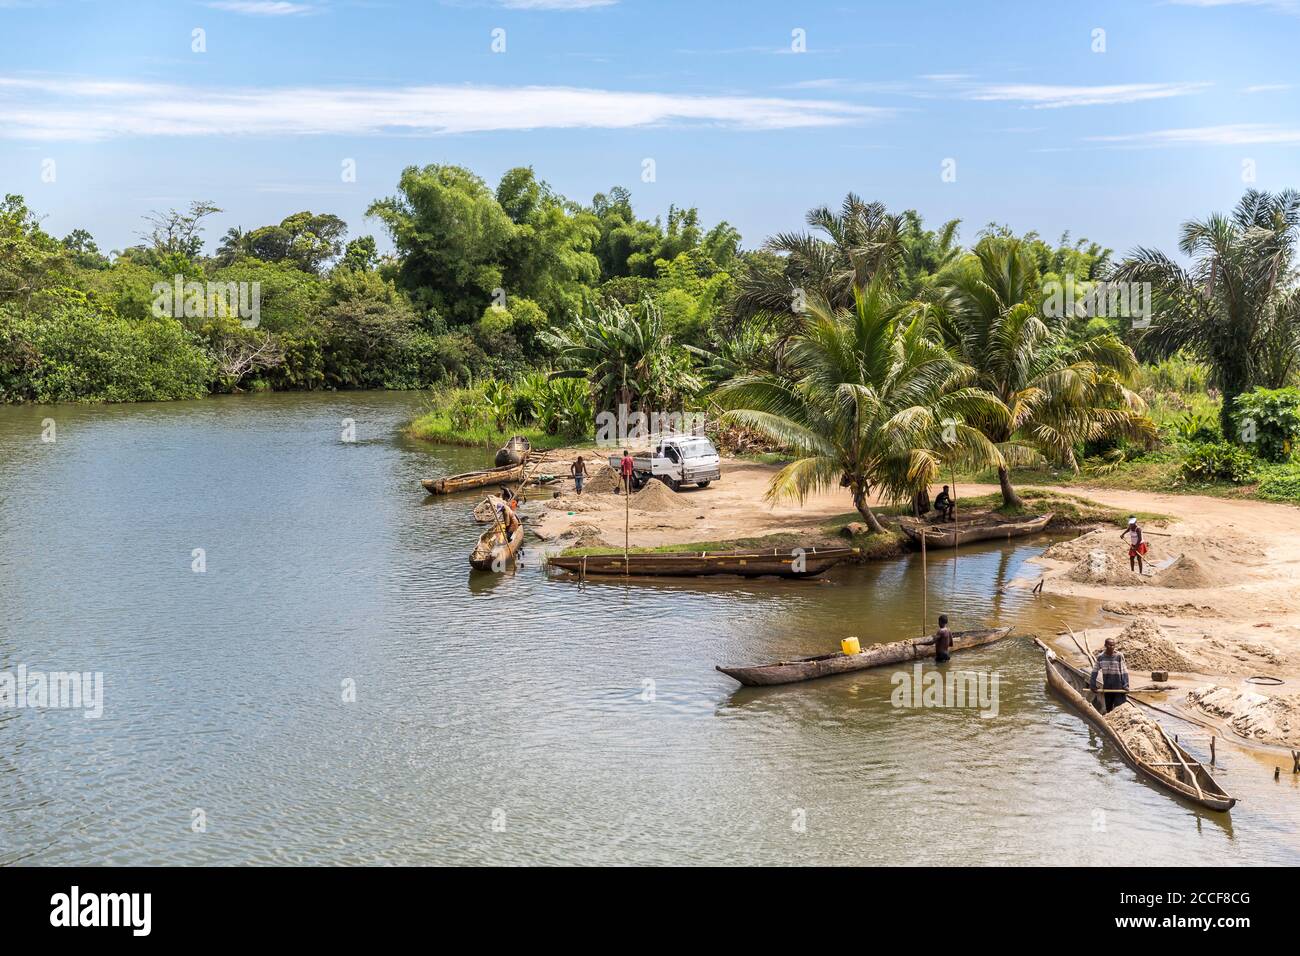 Local men and women unload sand from dugout canoes, Ivoloina River, Taomasina, Tamatave, Madagascar, Africa, Indian Ocean Stock Photo